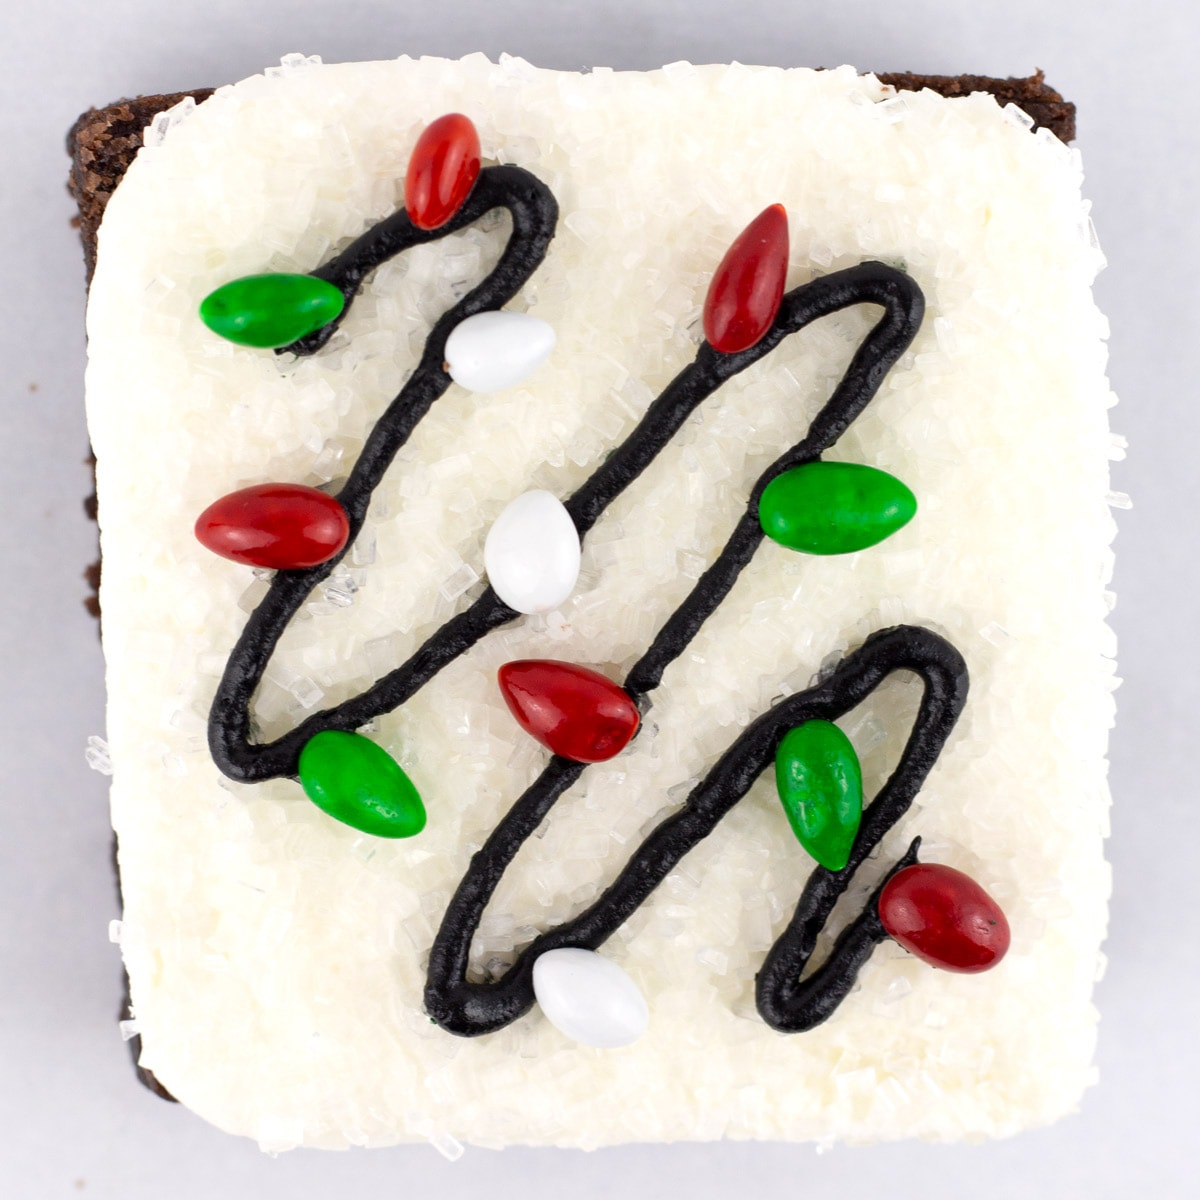 A square brownie decorated with Christmas lights using black frosting and chocolate covered sunflower seeds as the lights.